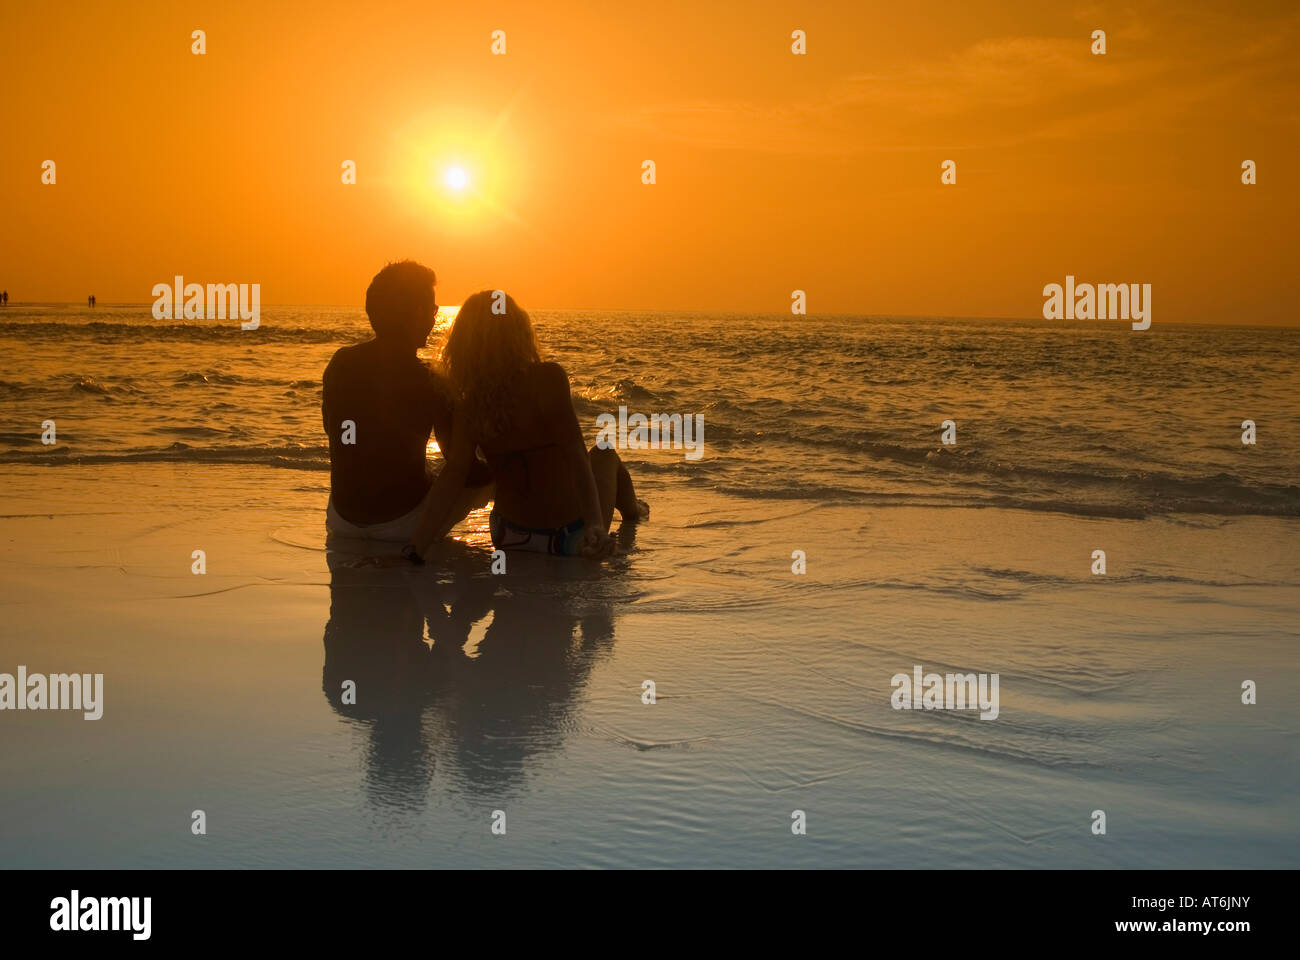 Couple sitting at the beach, silhouetted at sunset, Maldives Stock Photo